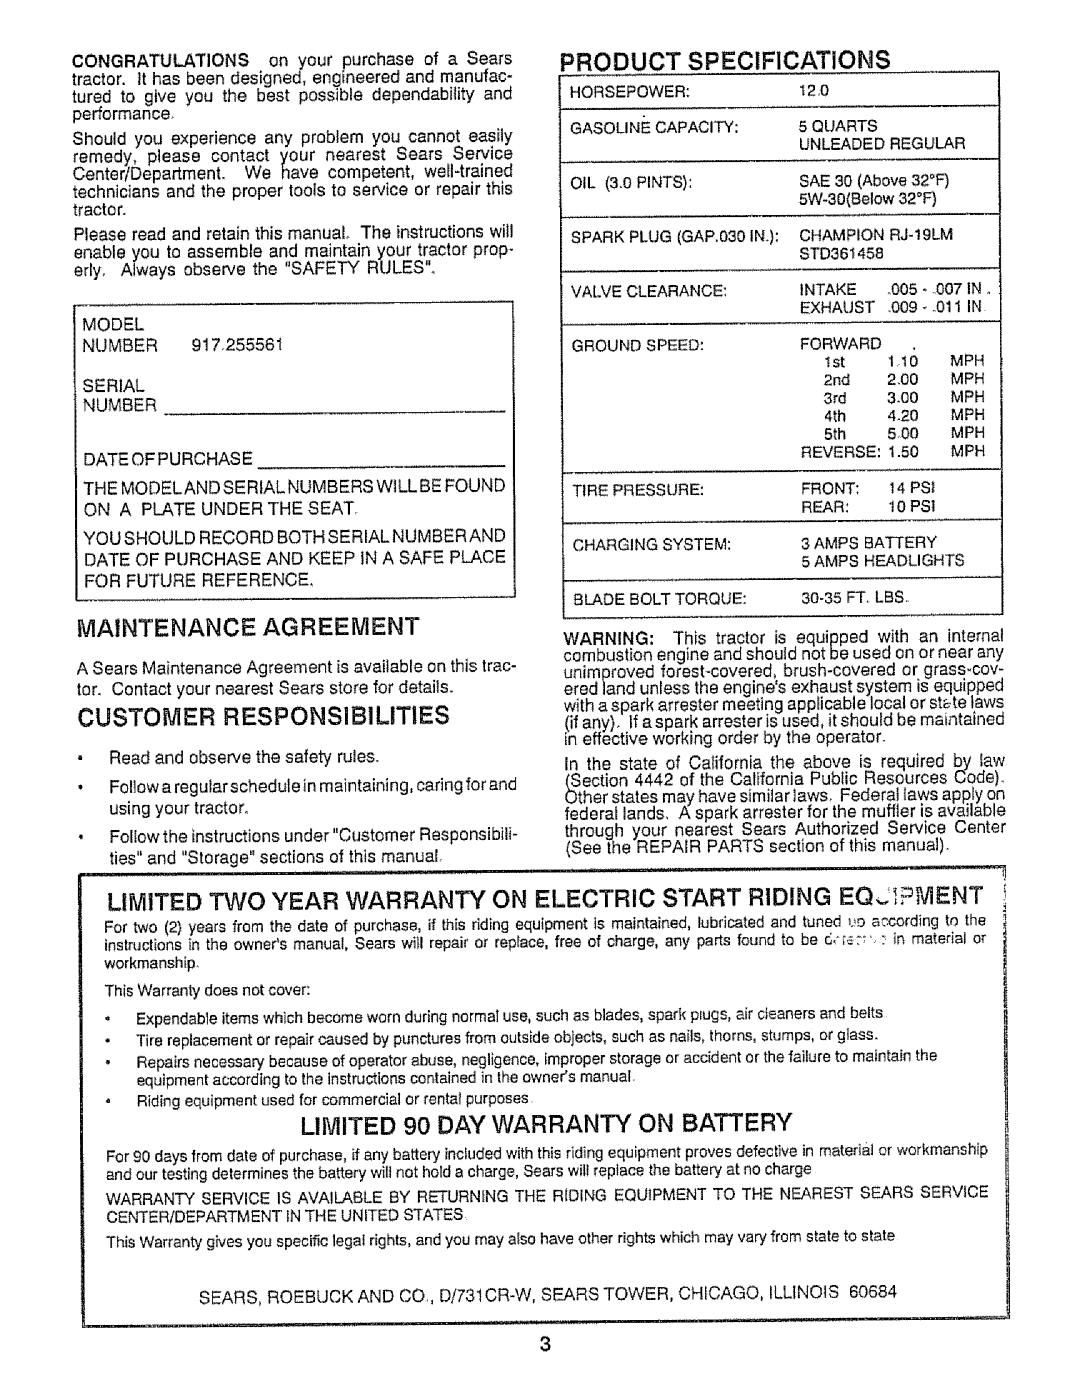 Craftsman 917.255561 owner manual =Roduct Specifications, Maintenance Agreement, Customer Responsibilities 